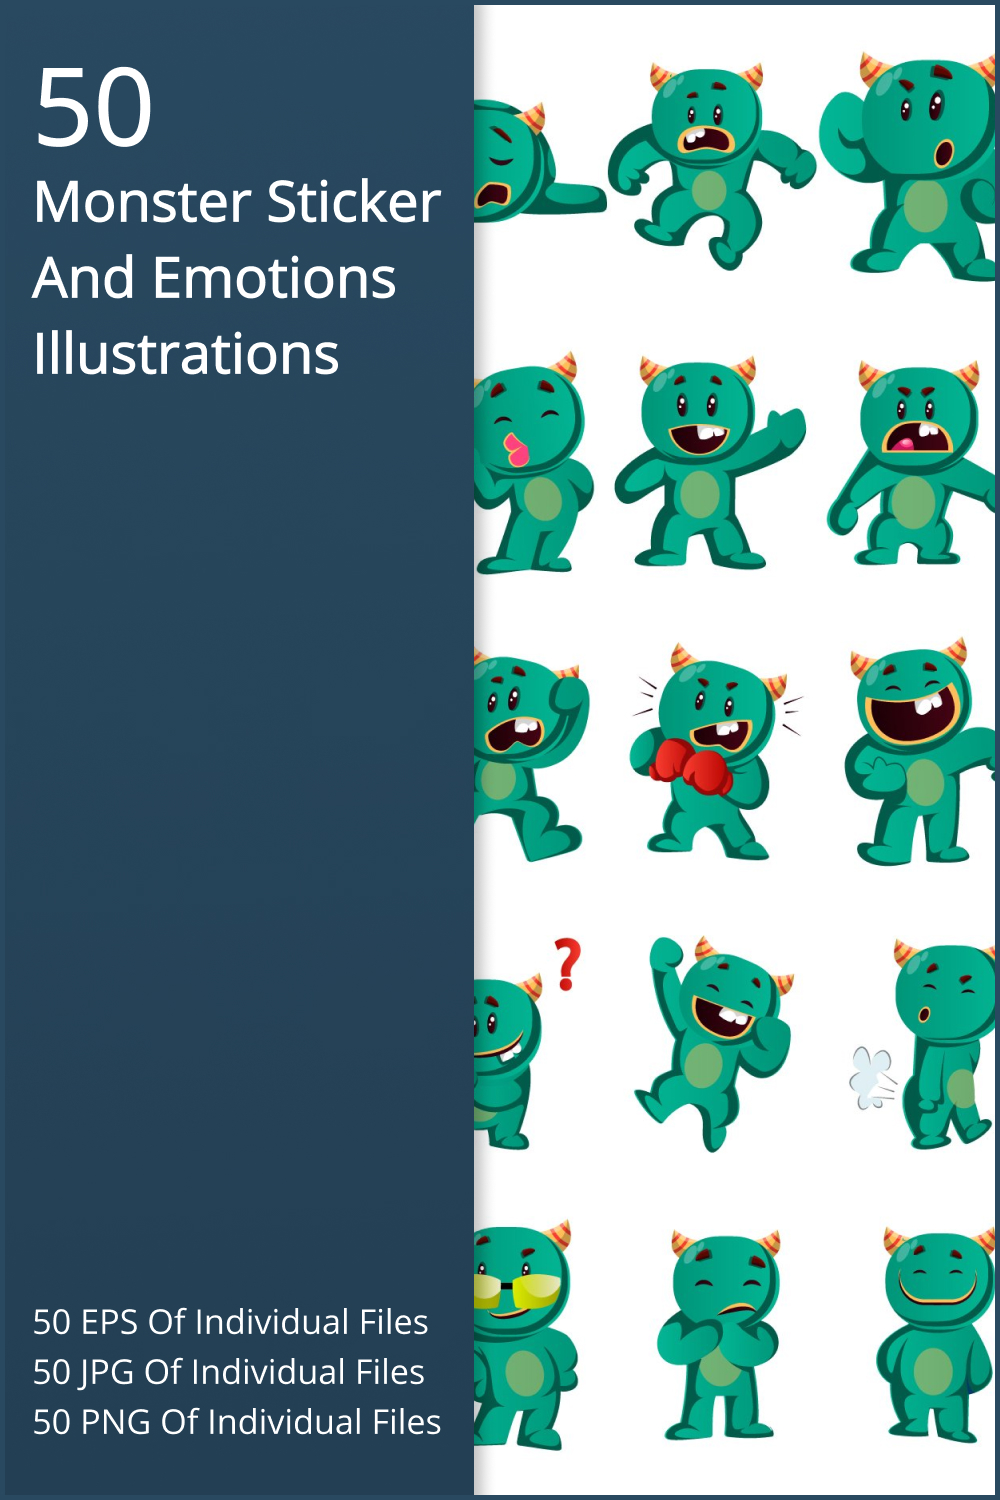 50x monster sticker and emotions illustrations 02 176